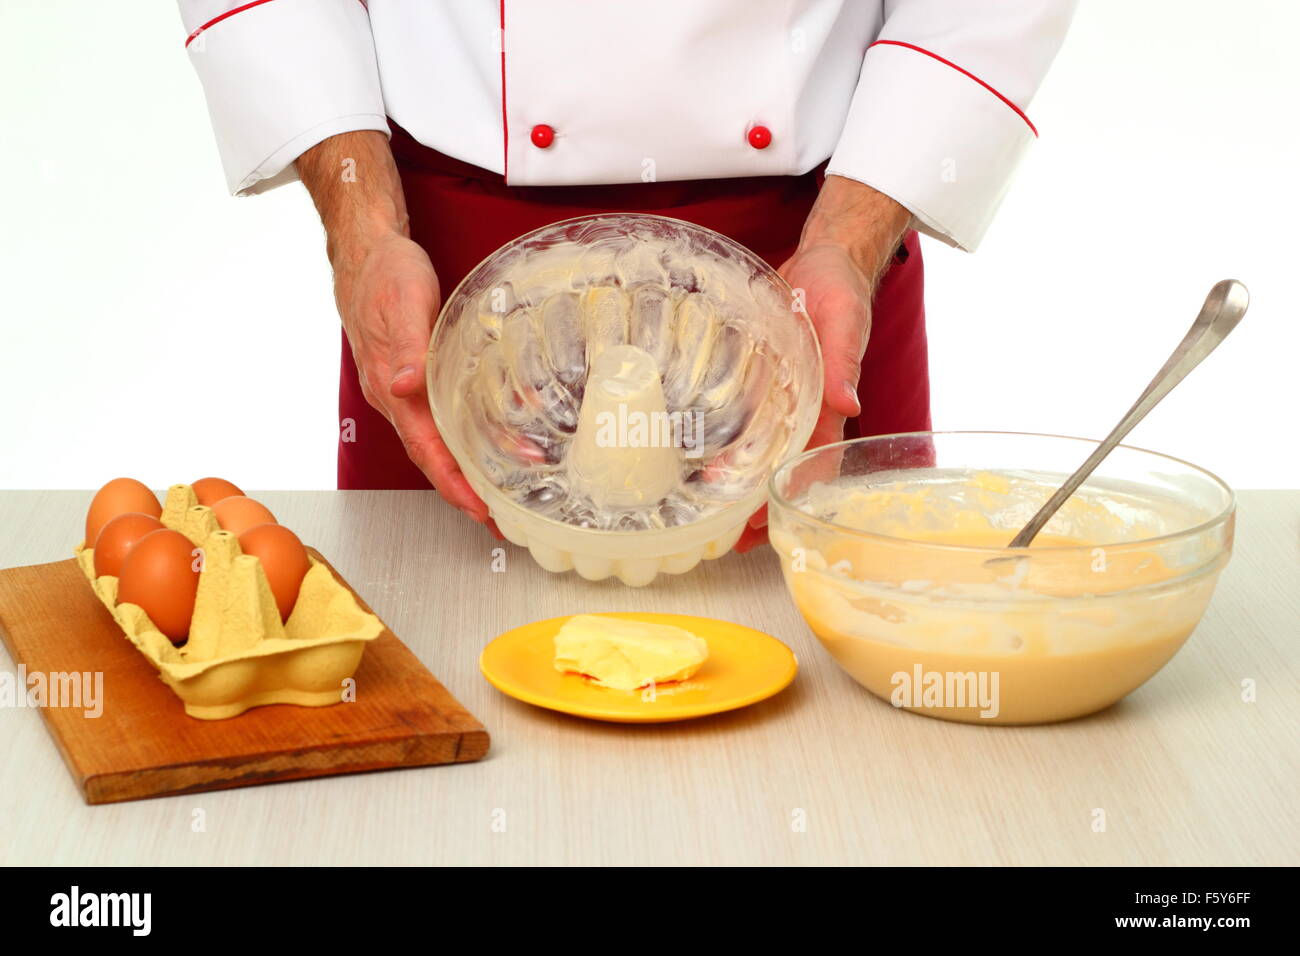 Greasing cake pan with margarine or butter. Making bundt cake with chocolate glaze. Stock Photo